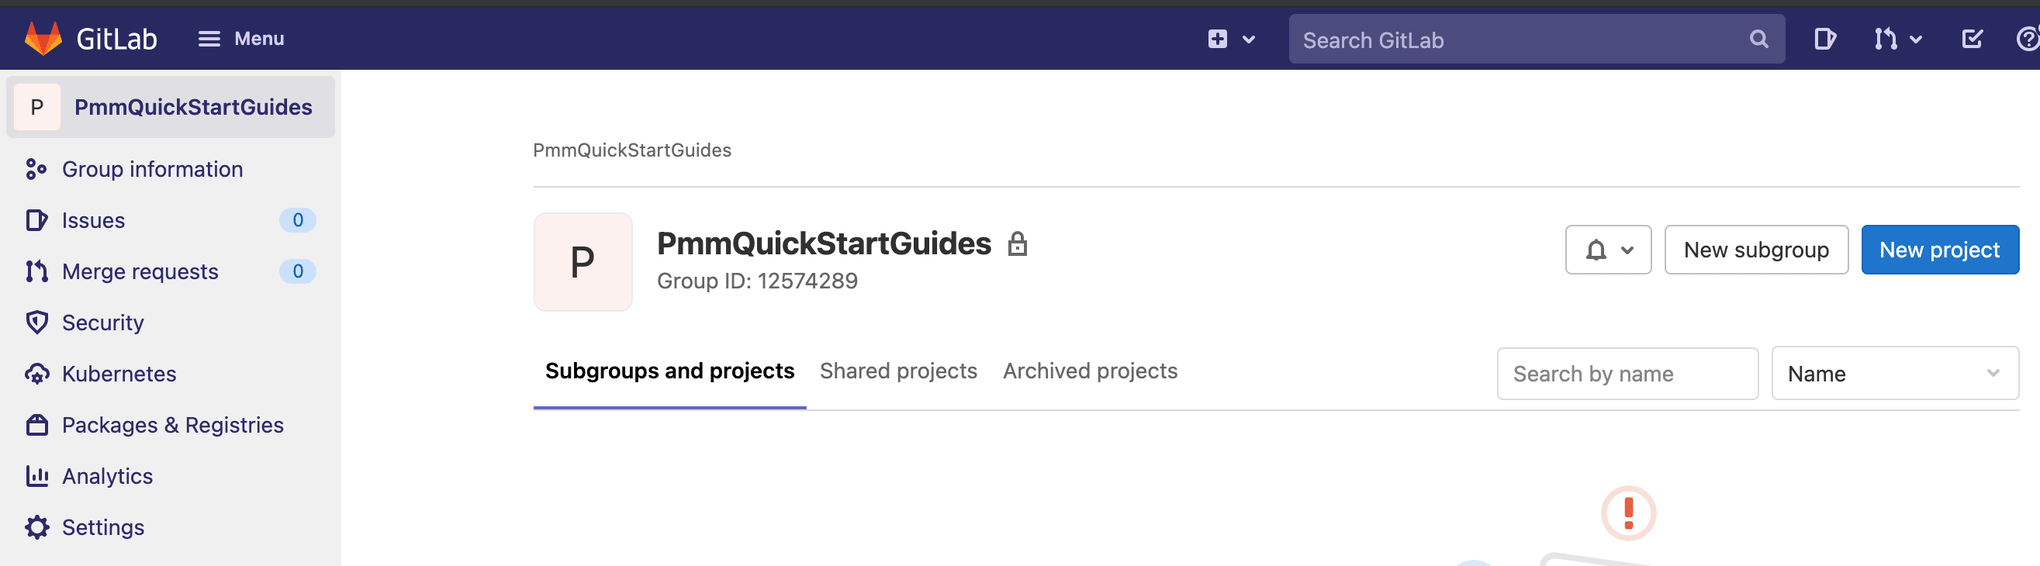 Navigating to create "New project" in GitLab